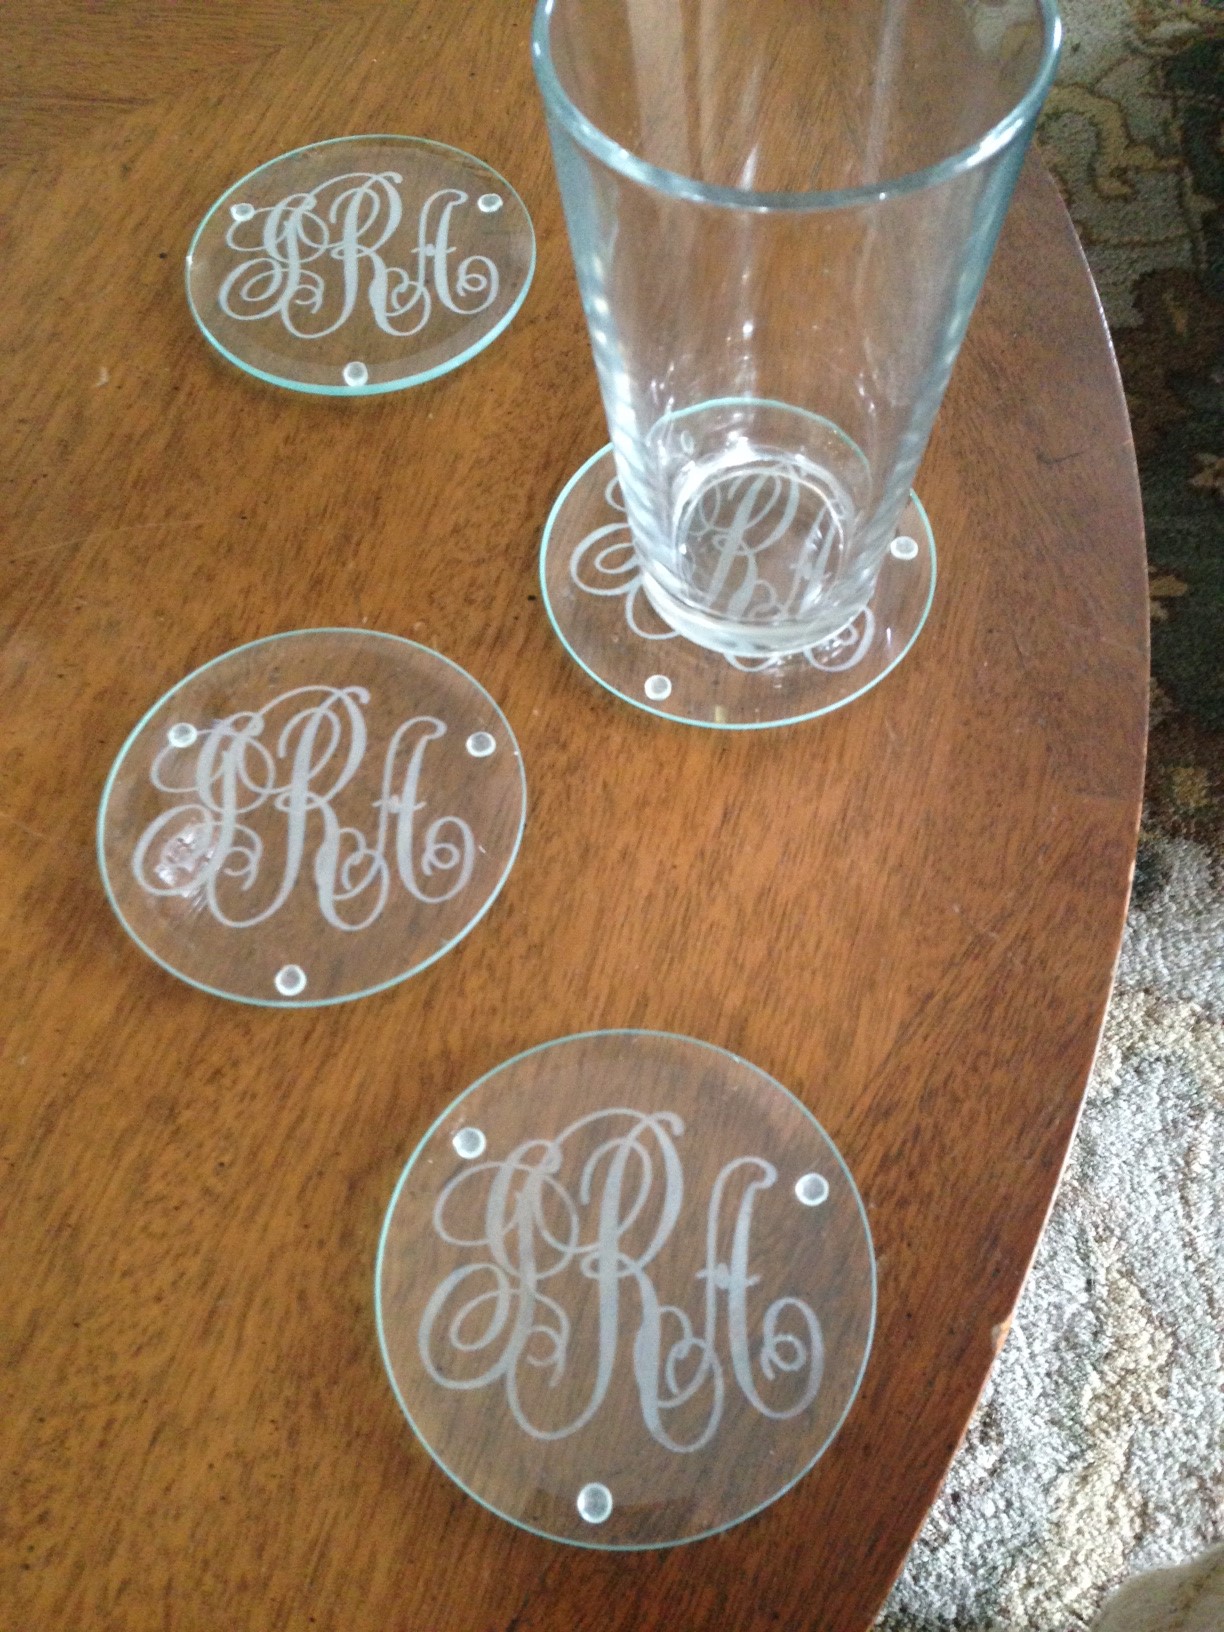 Monogrammed coasters give a personal touch. 